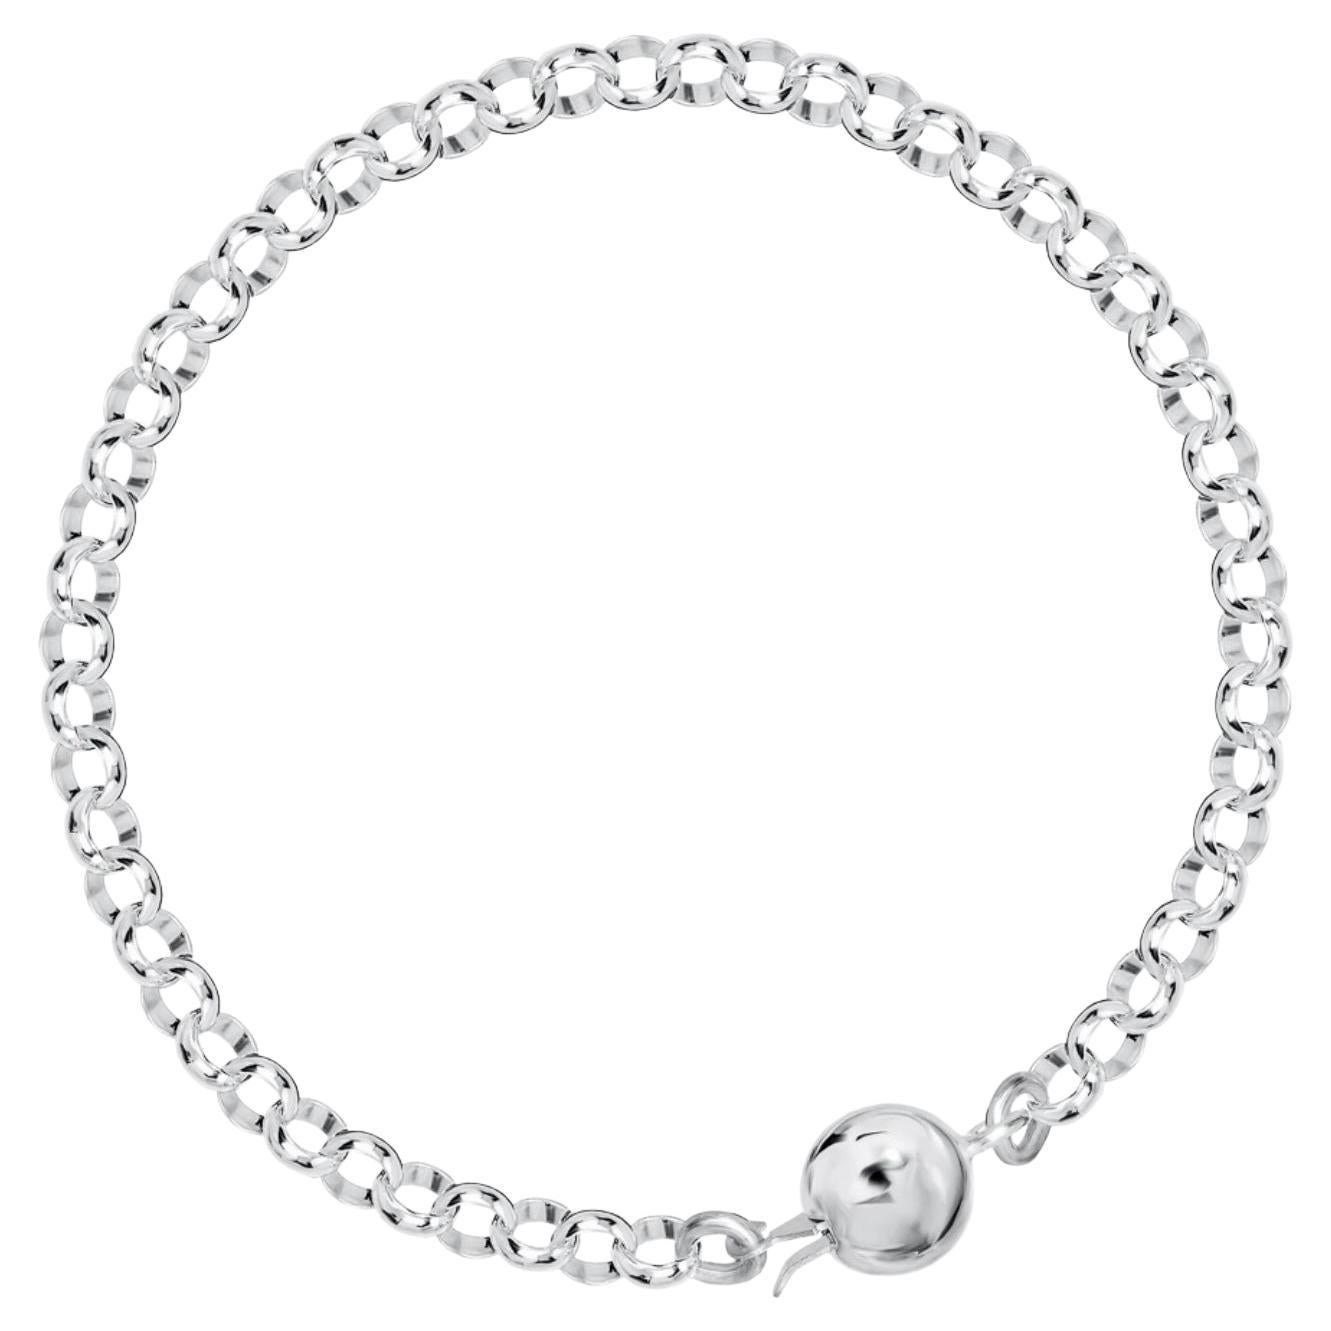 Chain bracelet with sphere sterling silver